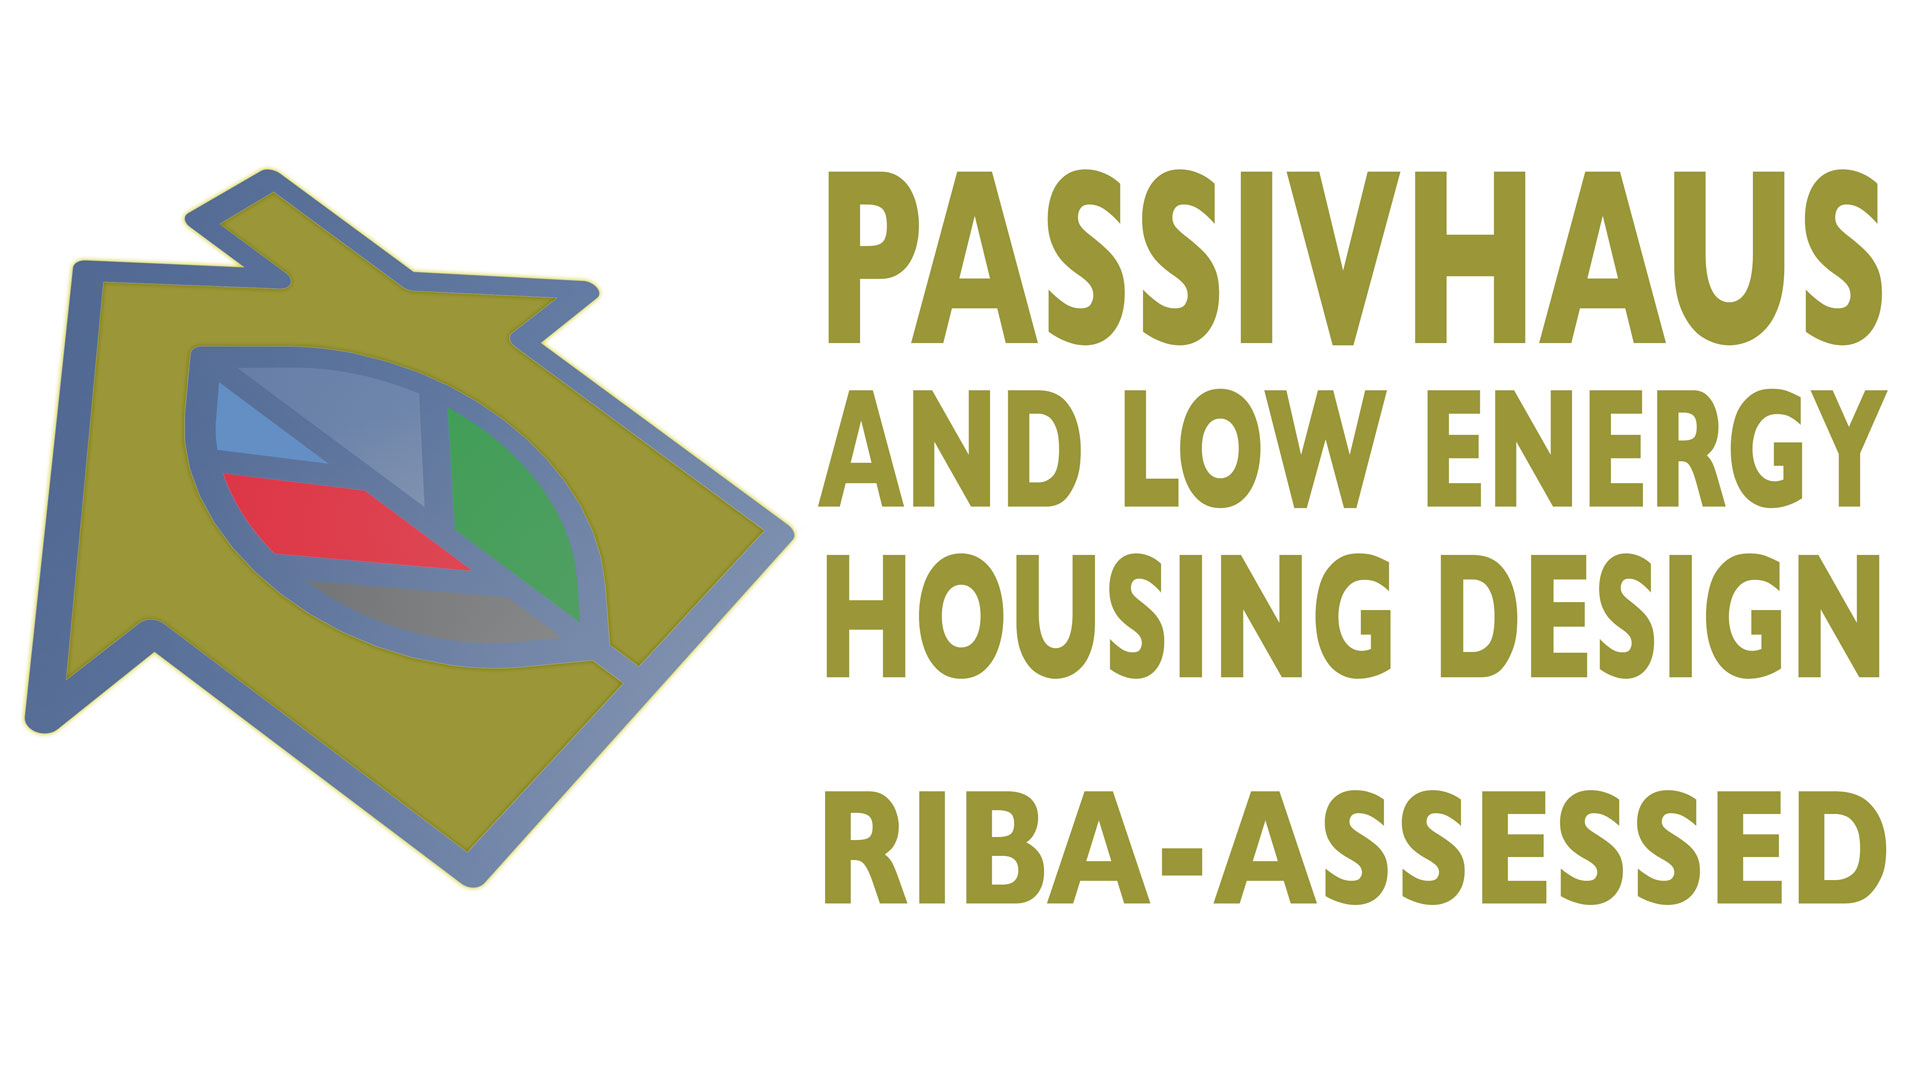 Welcome to our RIBA assessed webinar, "Passive House & Low Energy Housing Design". This webinar gives an overview of the Passive House design principles, the benefits they provide in terms of energy performance, and the means by which these benefits are achieved. It also introduces some common fabric first systems and solutions to simplify the process of optimising low energy design using the passive principles.